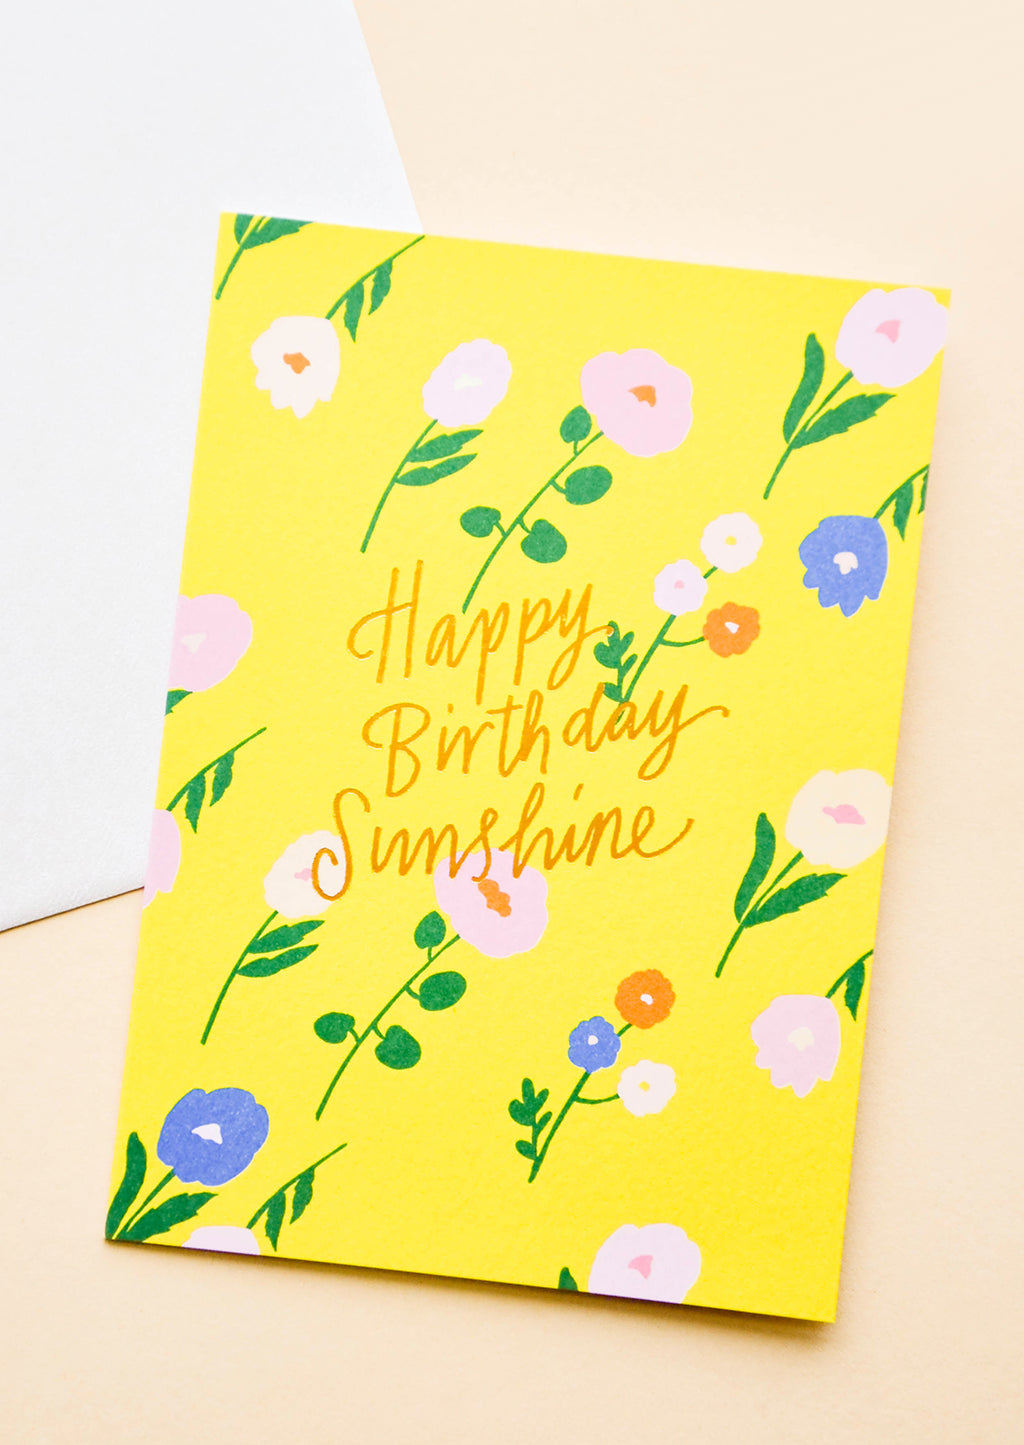 1: Greeting card in sunny yellow with flowers and "Happy Birthday Sunshine" in gold text